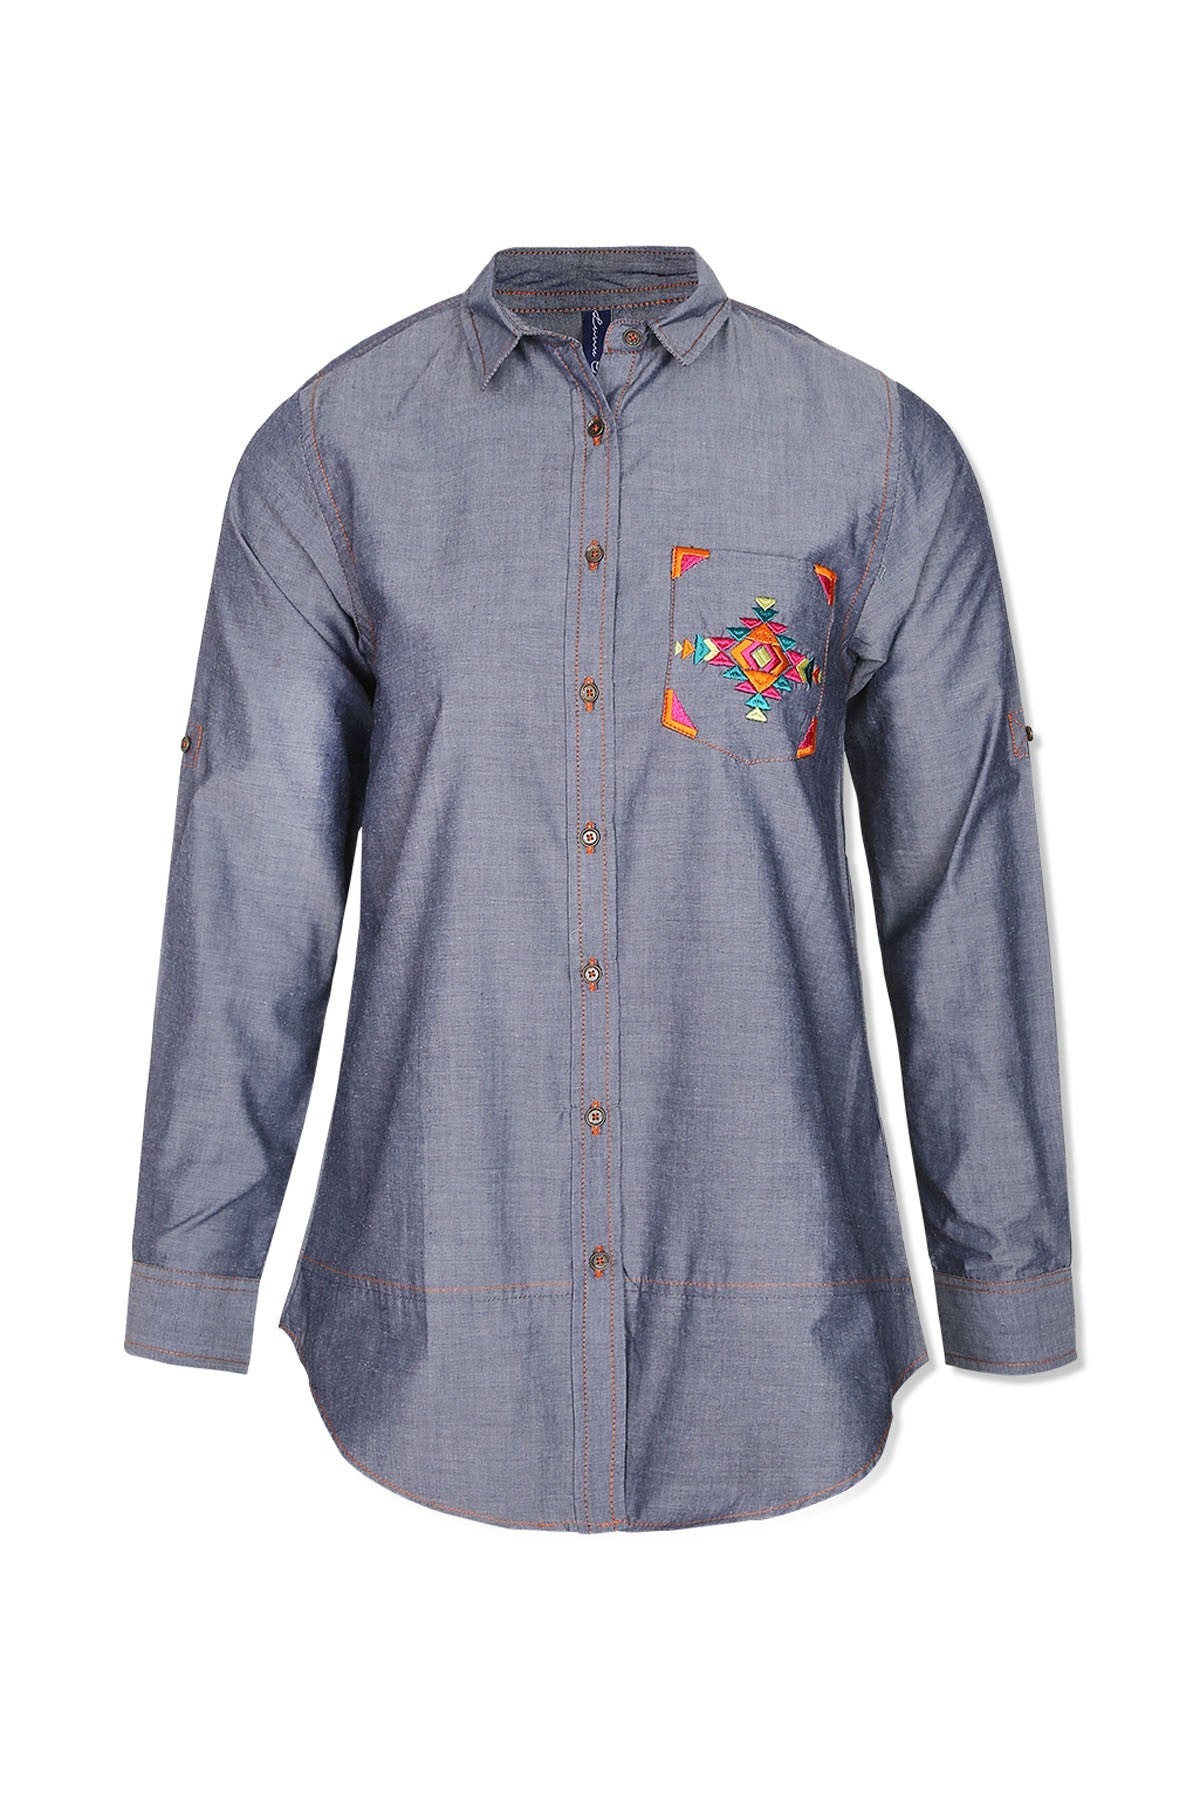 PATCH POCKET EMBROIDERED SHIRT